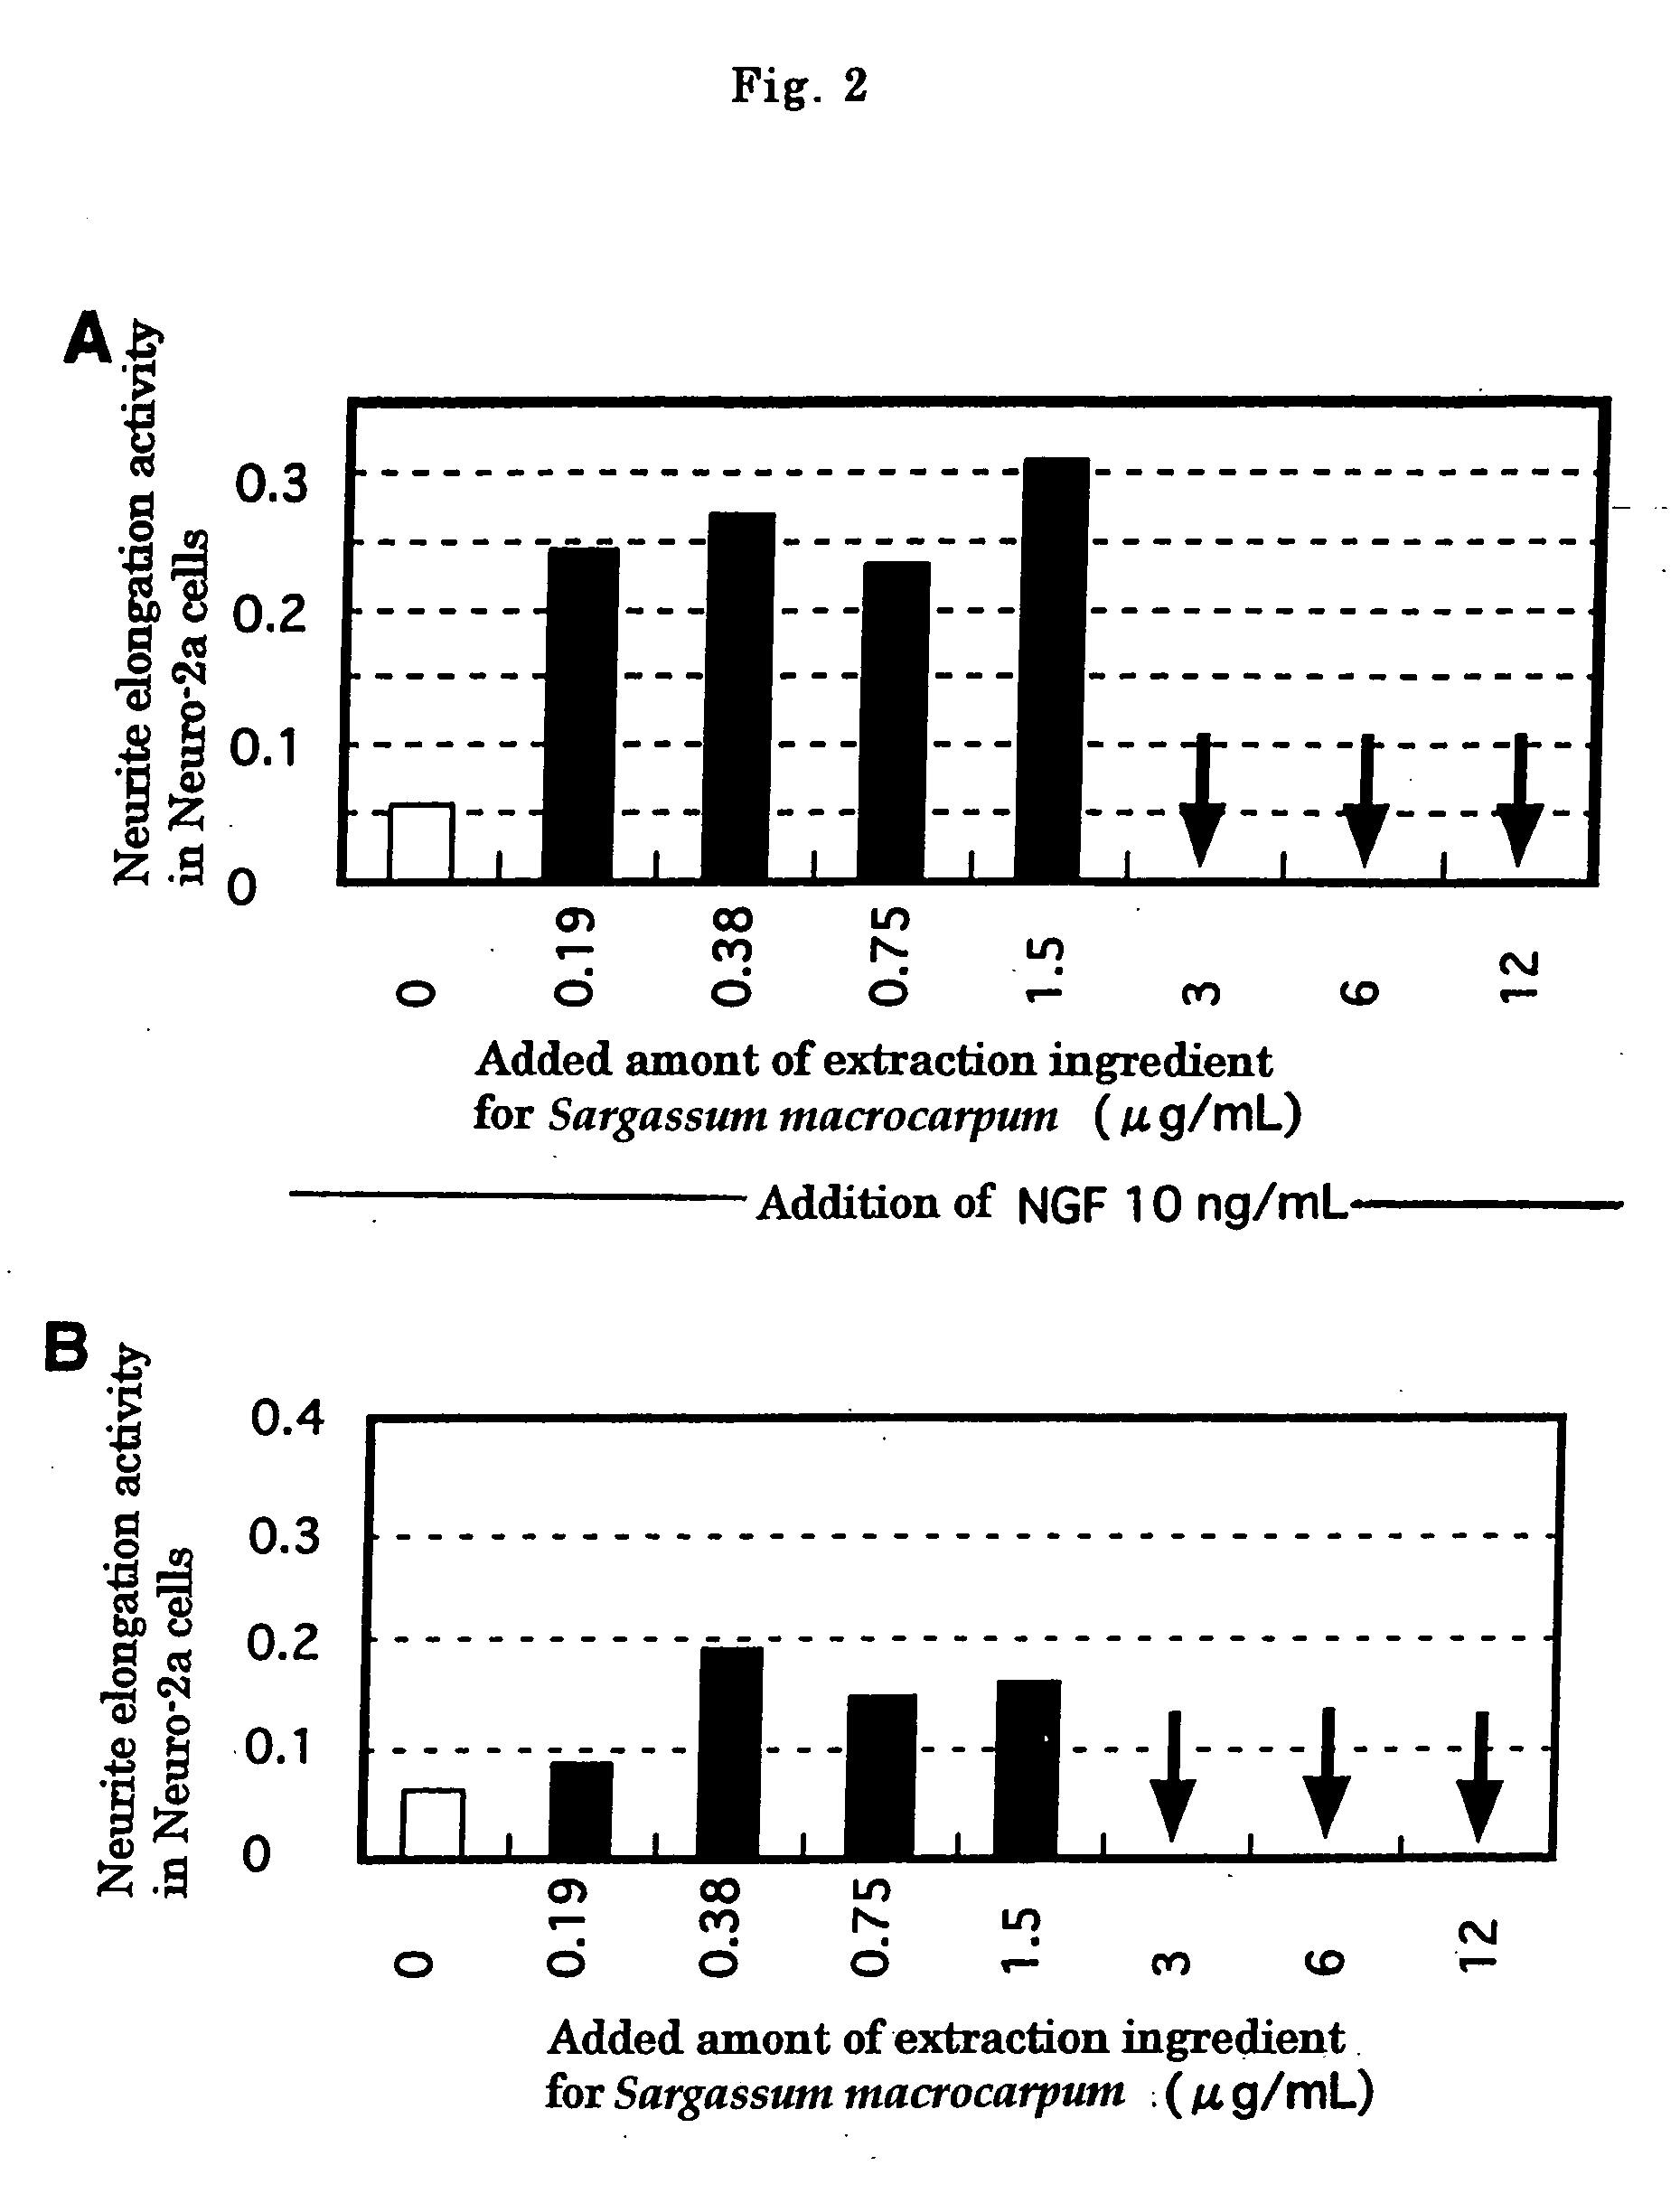 Nerve growth factor activity potentiating agents